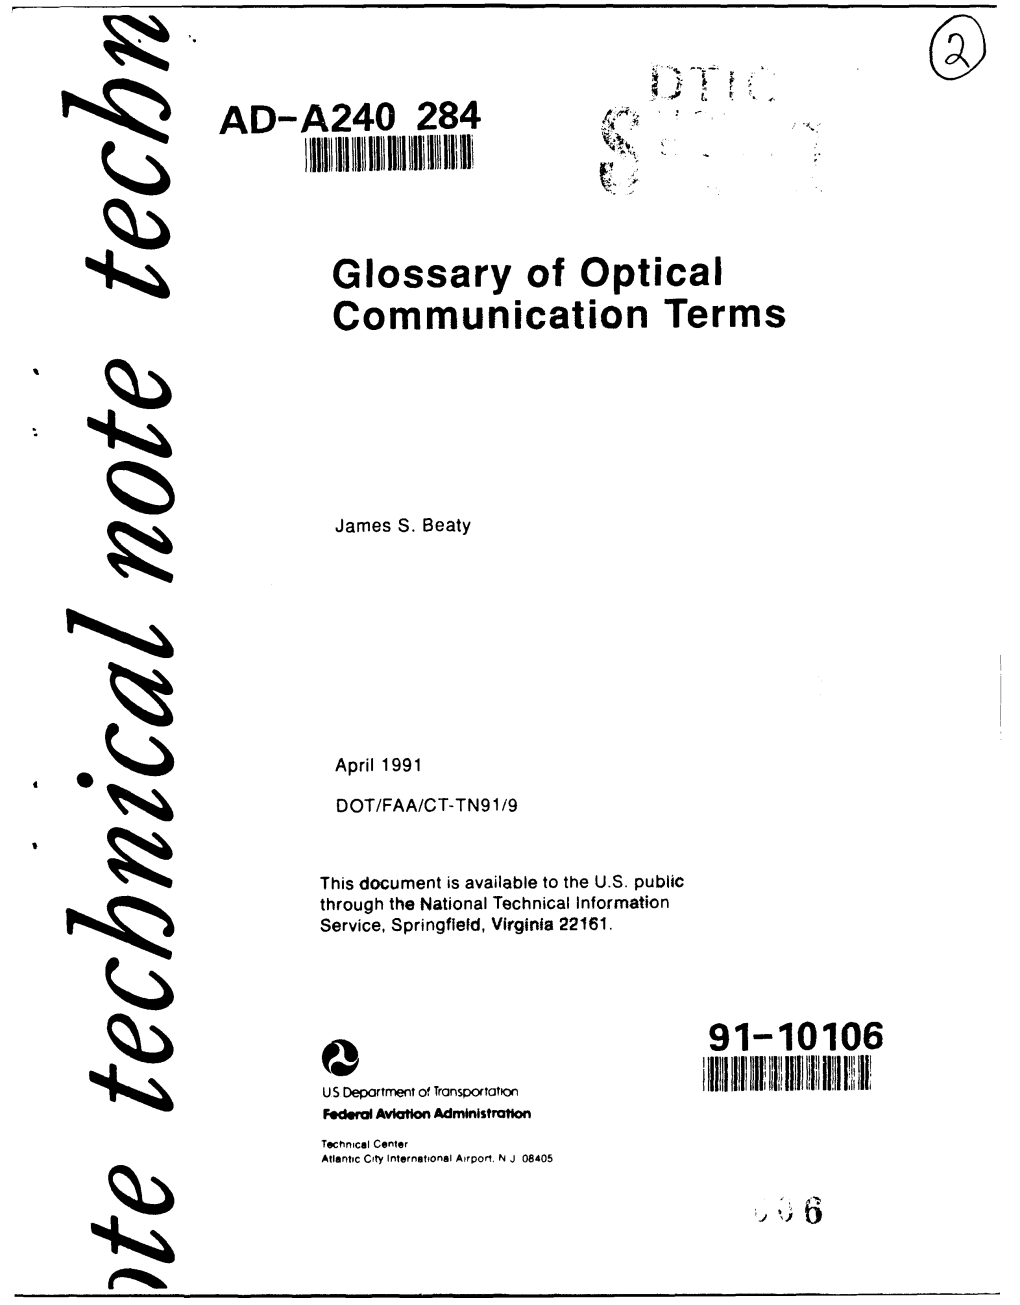 Glossary of Optical Communication Terms